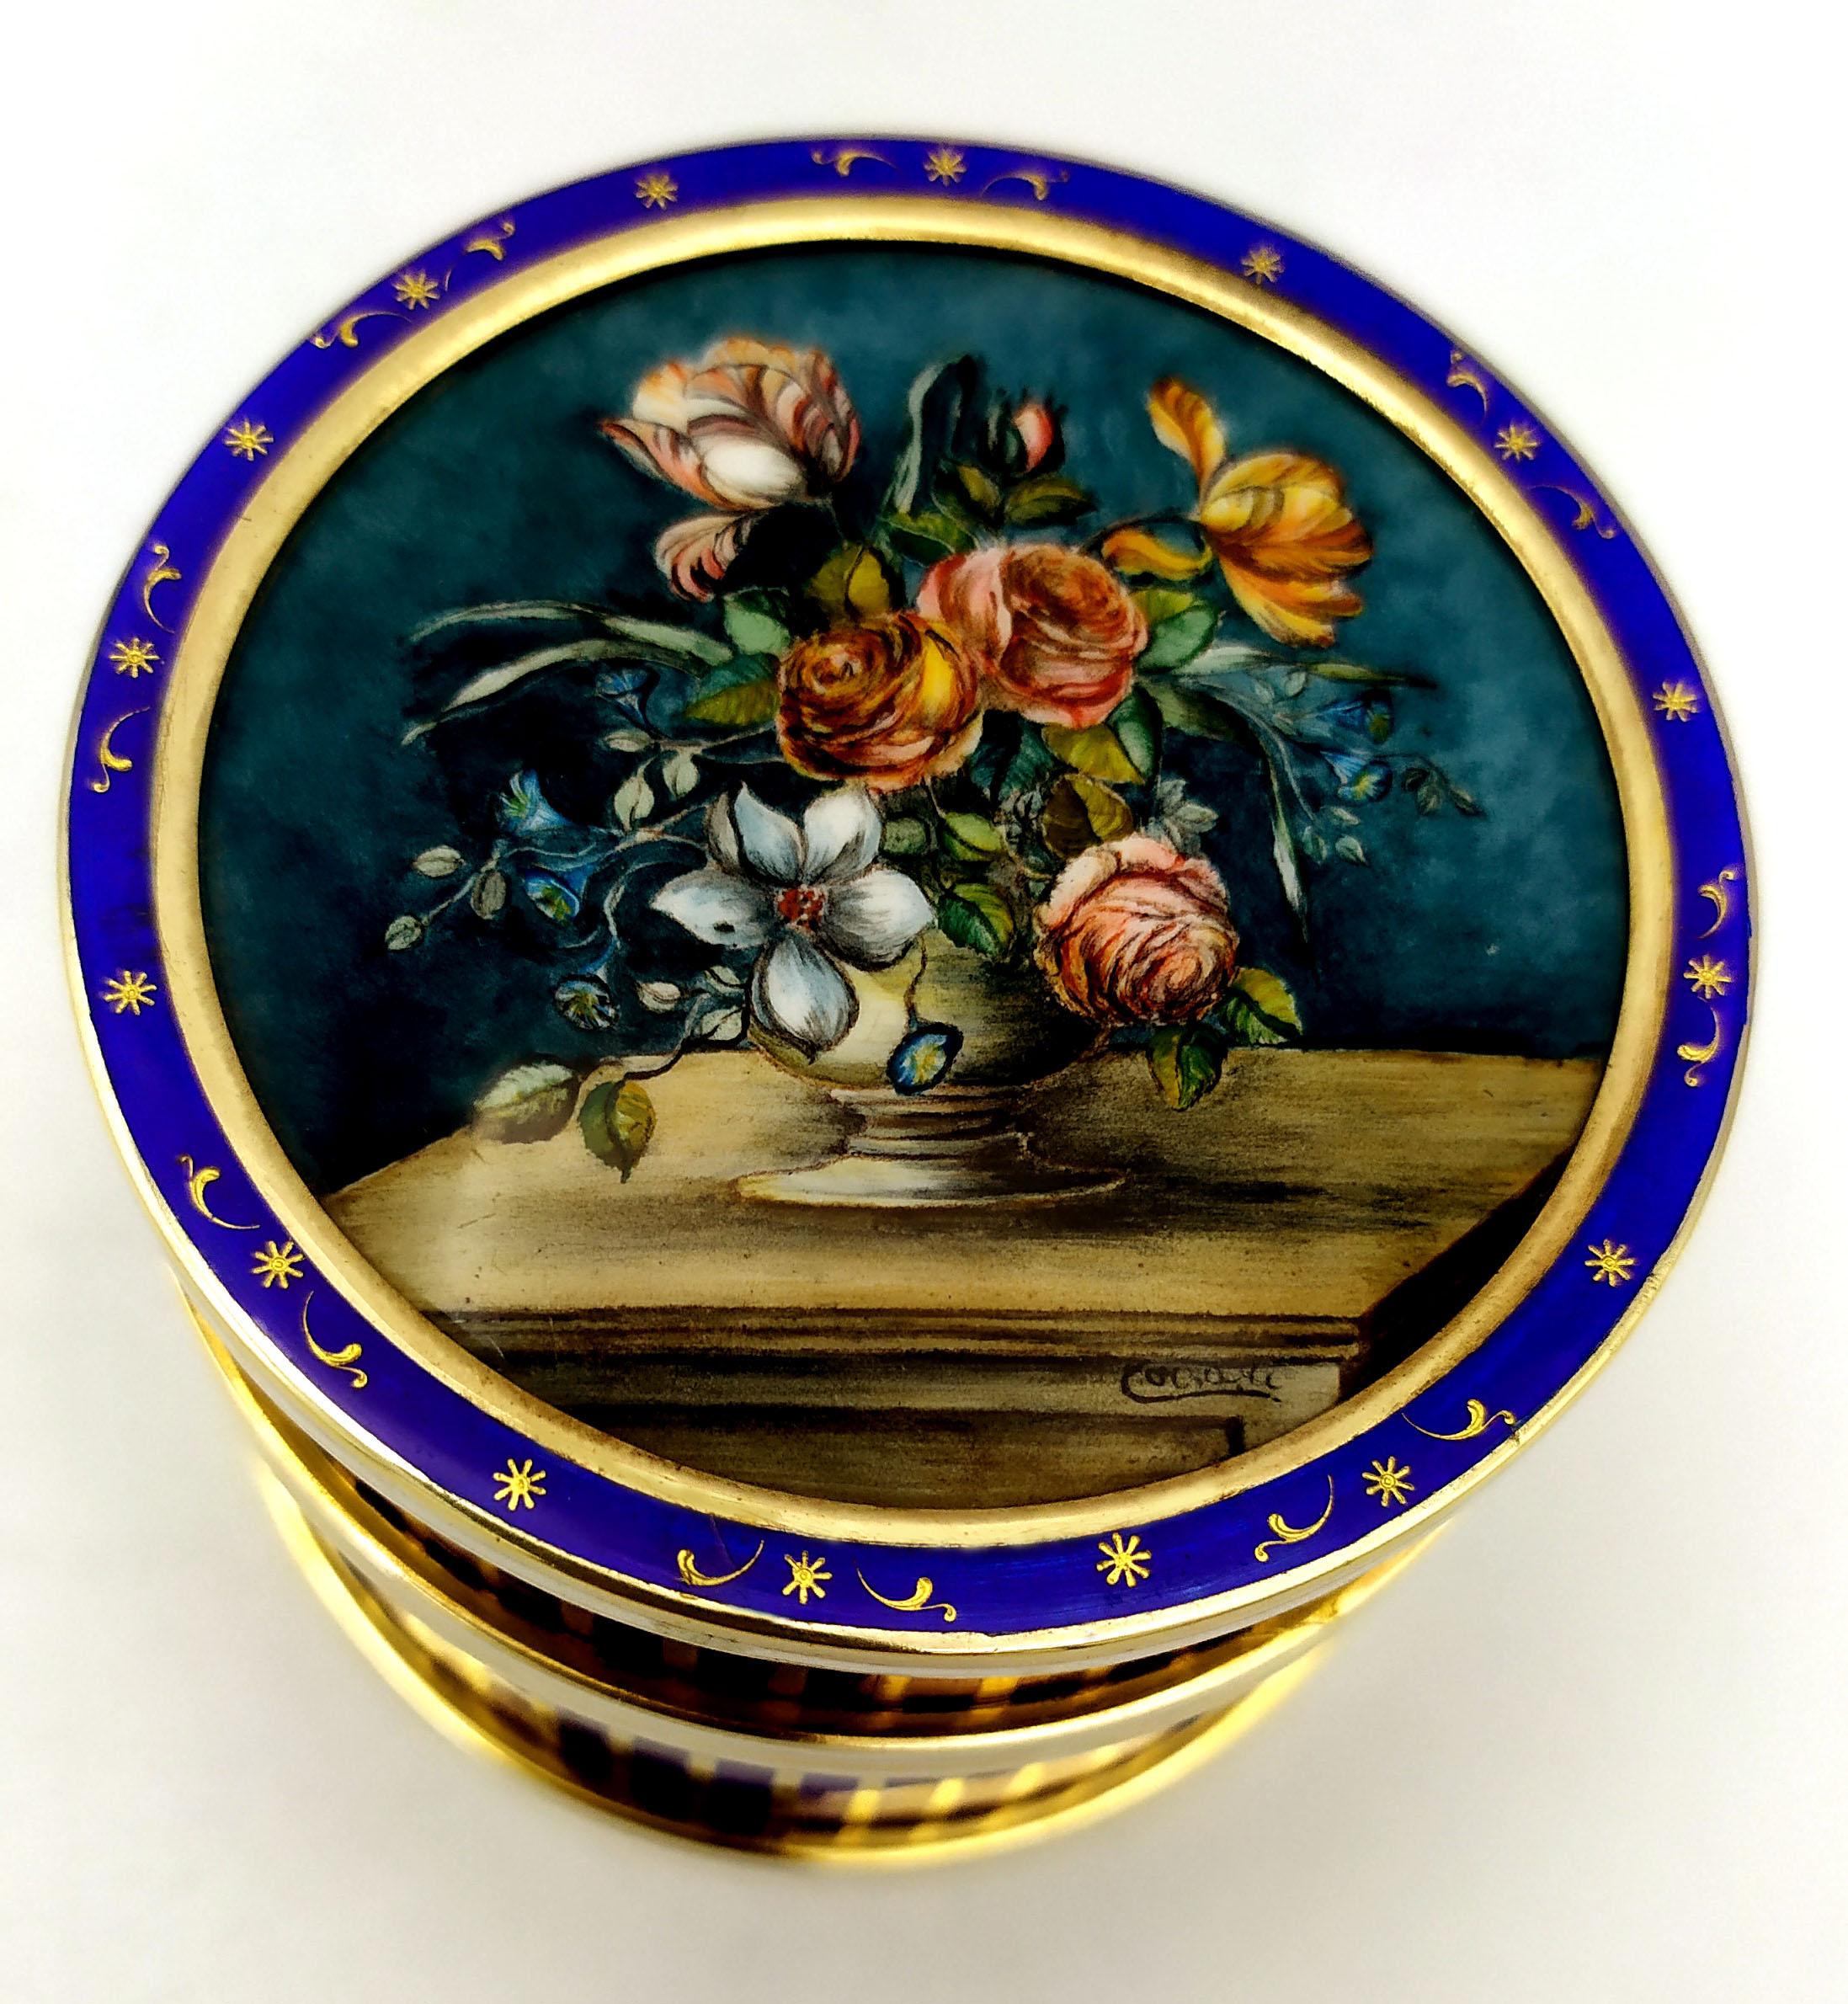 Round table box in 925/1000 sterlin silver gold plated with fired enamels, with “paillons” in pure gold on the upper circle, fine fired enamelled miniature with hand-painted floral image by the painter Bruno Corsari, striped enamelled border